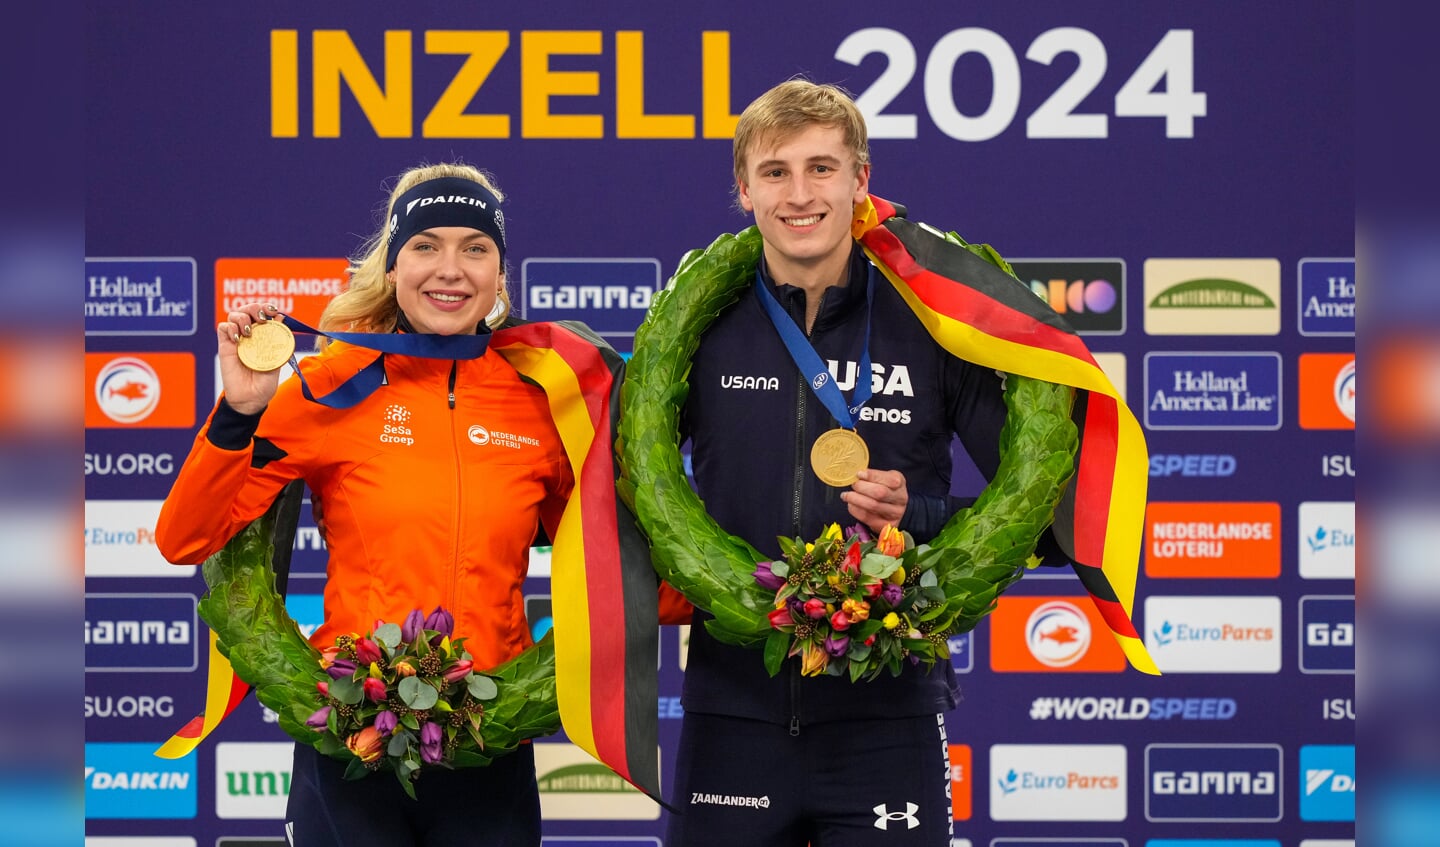 INZELL, GERMANY - MARCH 10: Joy Beune of The Netherlands, Jordan Stolz of USA during the medal ceremony after competing on the Men's 10000m during the ISU World Speed Skating Allround Championships at Max Aicher Arena on March 10, 2024 in Inzell, Germany. (Photo by Douwe Bijlsma/Orange Pictures)